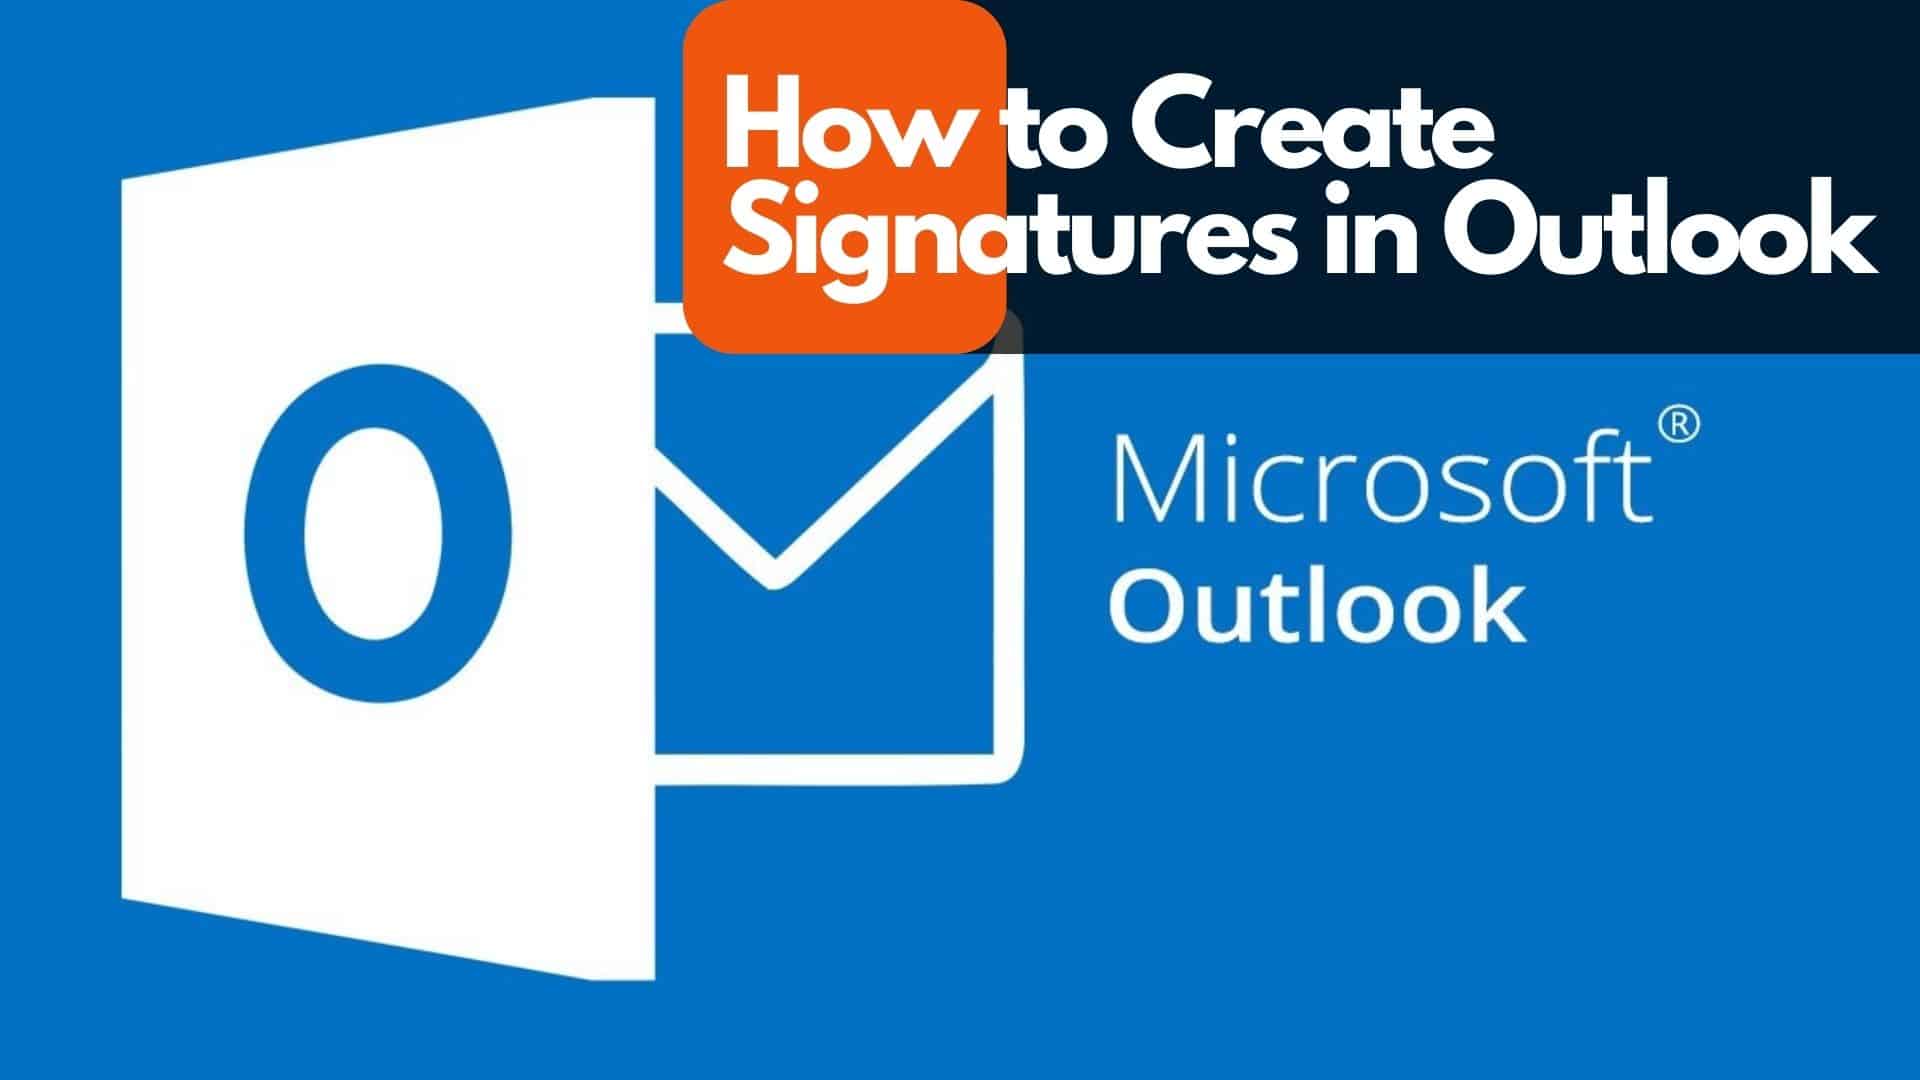 How to Create Signatures in Outlook